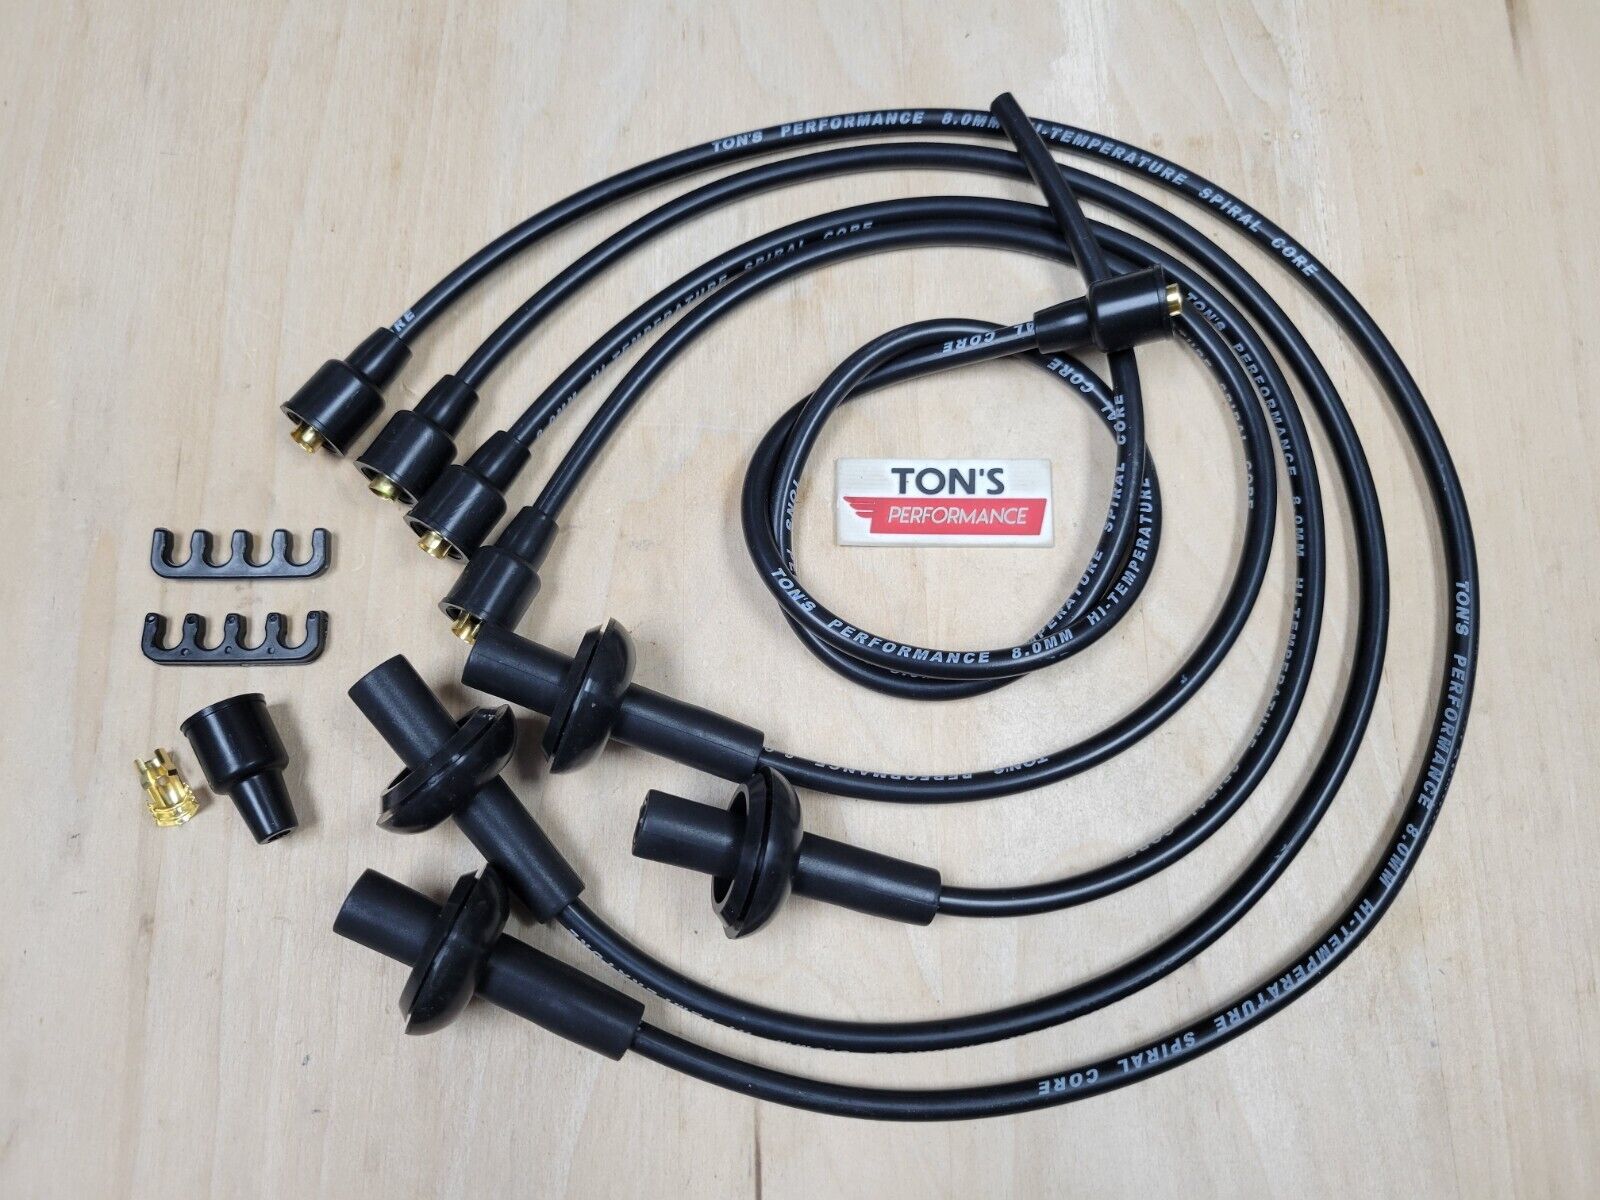 Ton's 8mm Silicone Spark Plug Ignition Wire Kit for Aircooled VW Bug Spiral Core